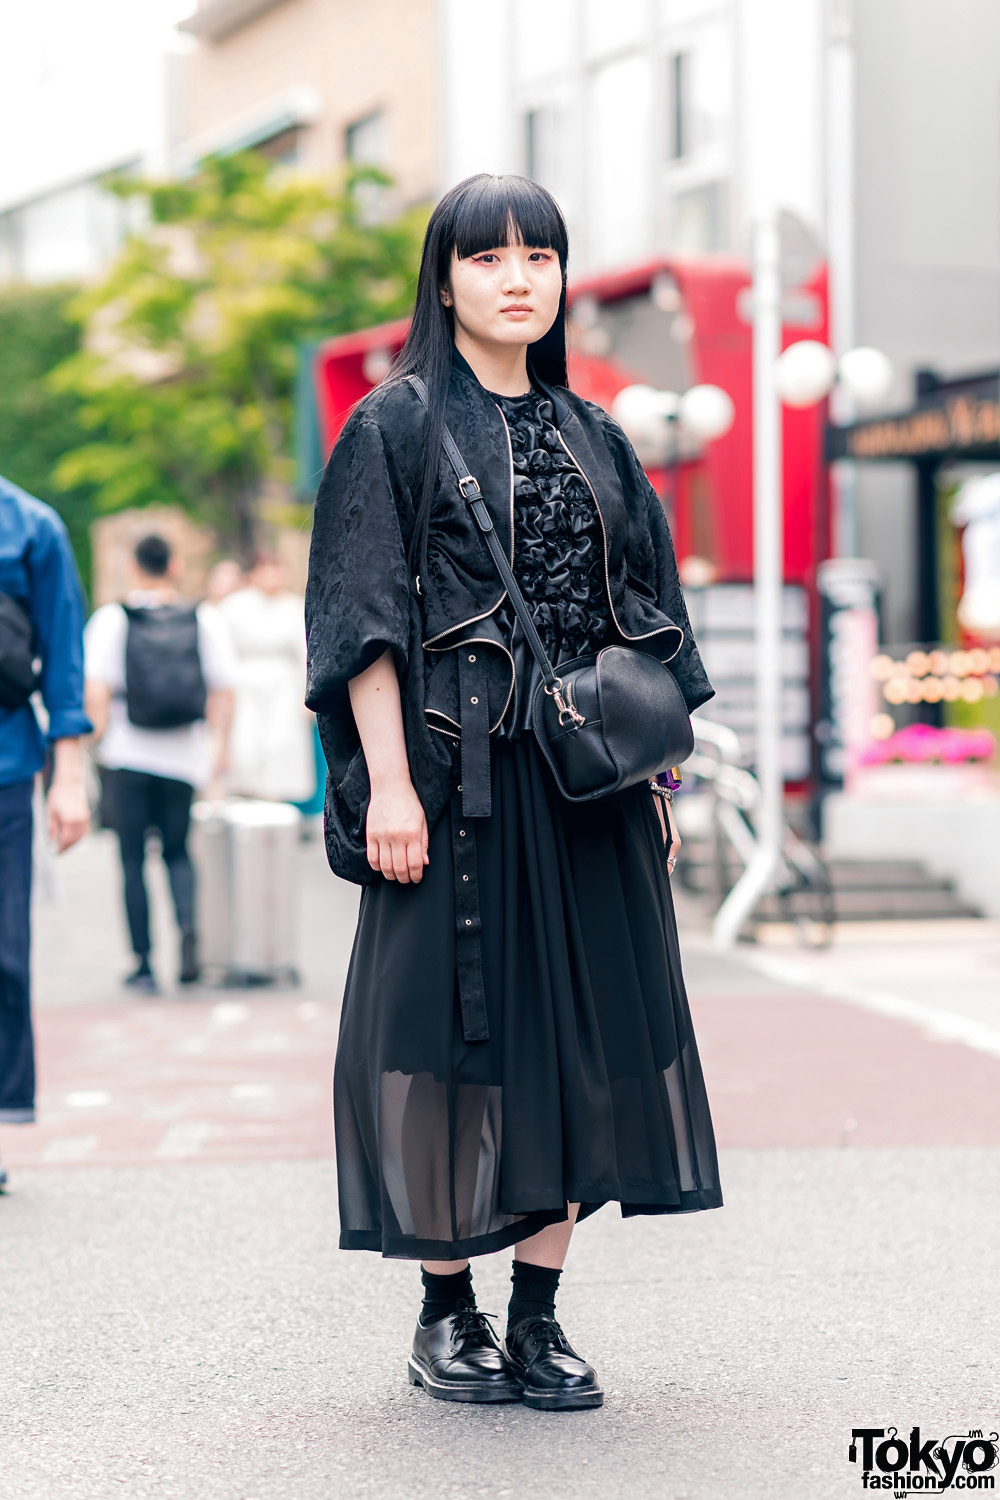 All Black Harajuku Street Style w/ Long Hair, Mame Accessories